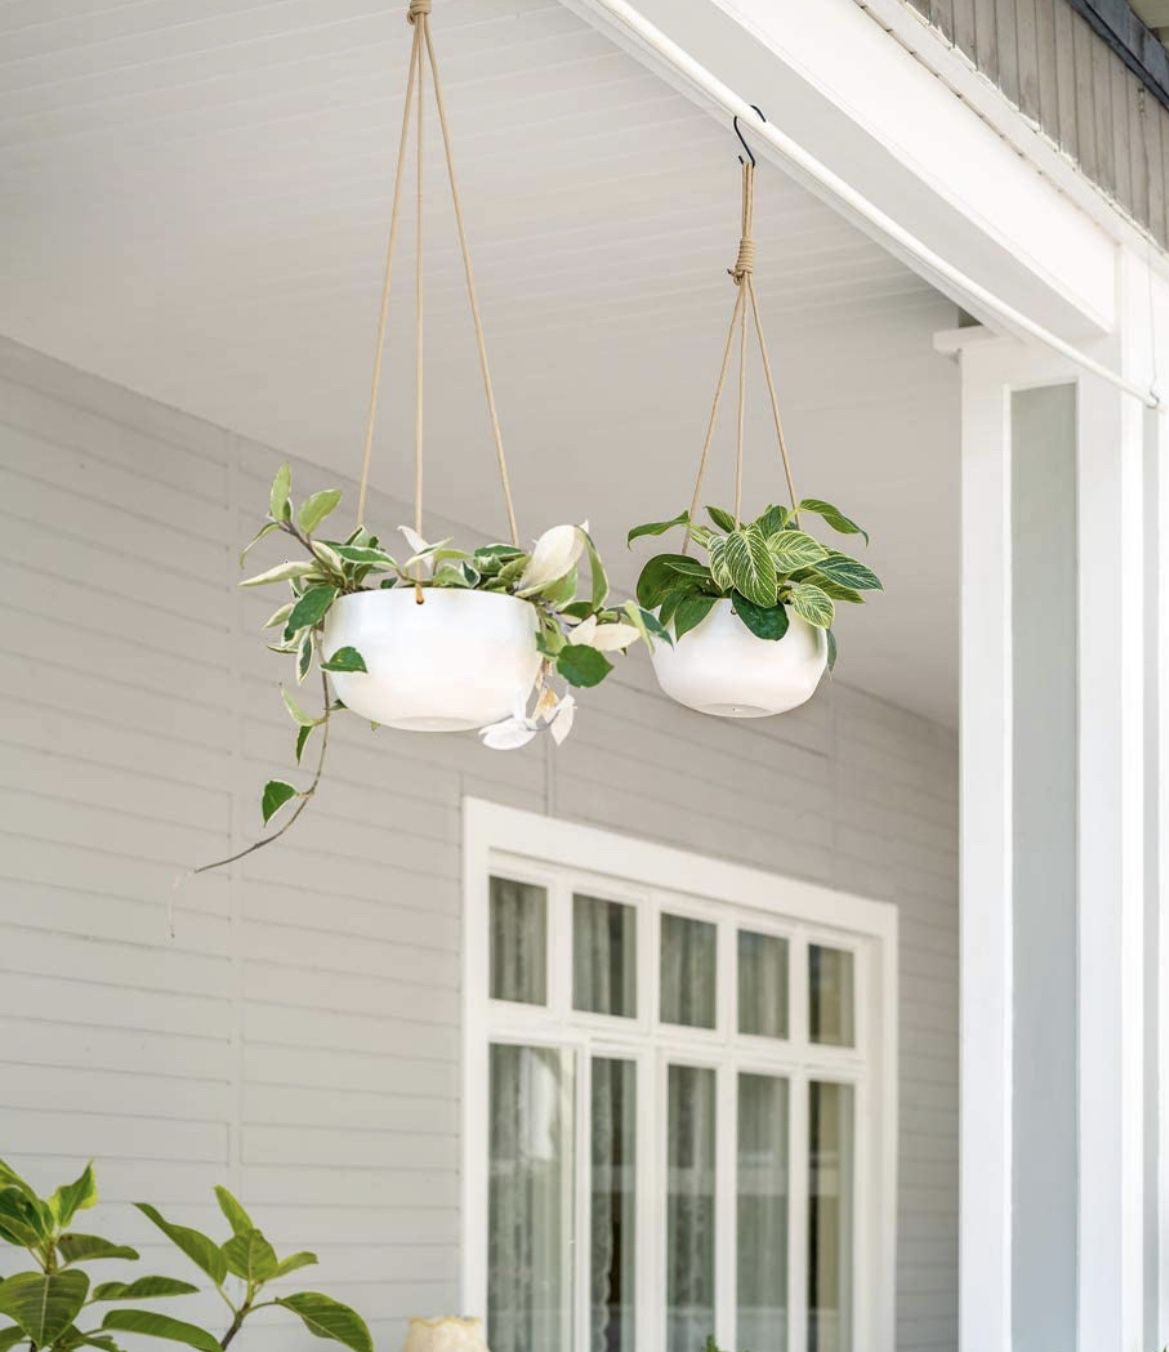 NEW Ceramic Hanging Planter of Shallow 8 Inch and Deep 6 Inch for Indoor Outdoor Plants, Modern Plant Pot Geometric Porcelain Hanging Basket with Poly